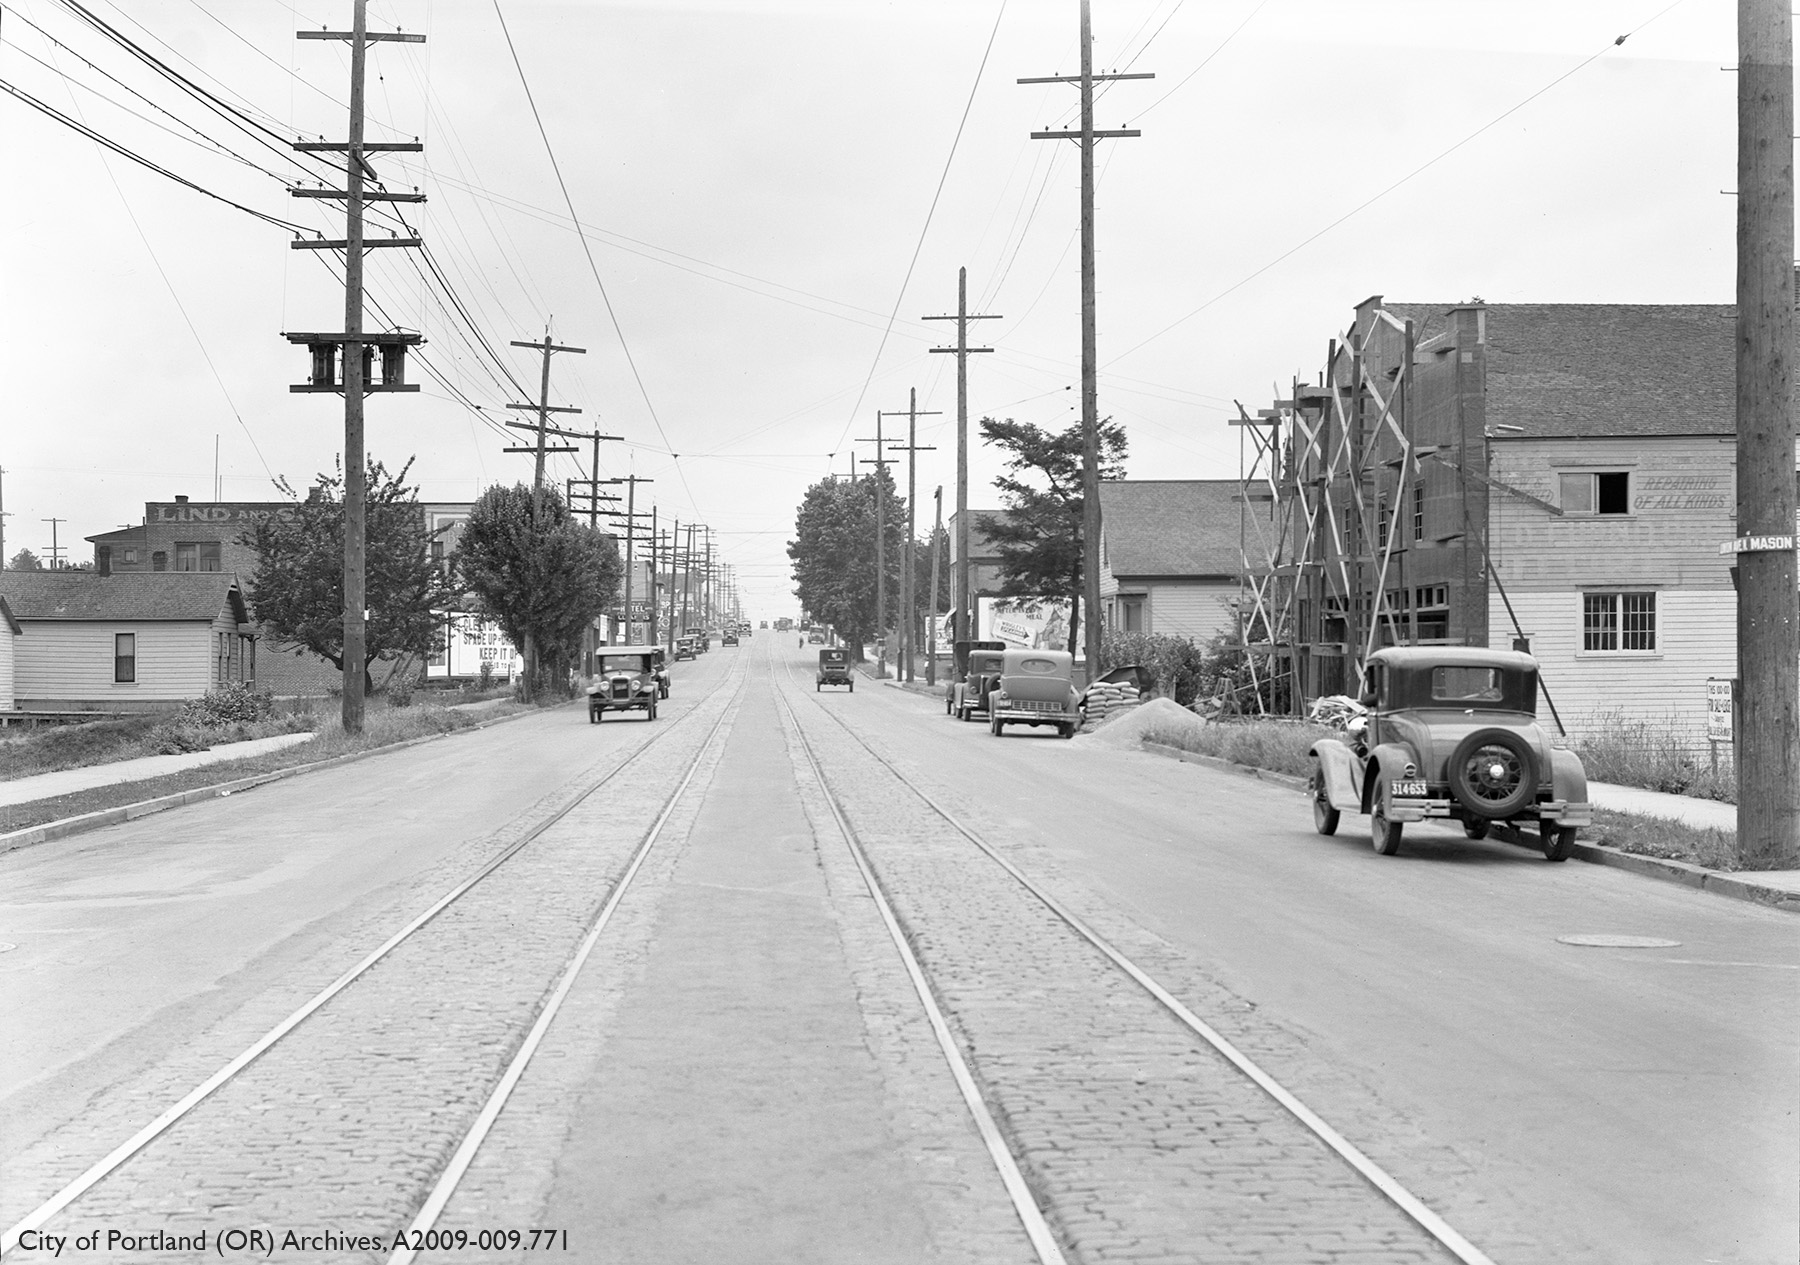 Black and white photograph of street with two sets of tracks, cars parked on the sides of the road